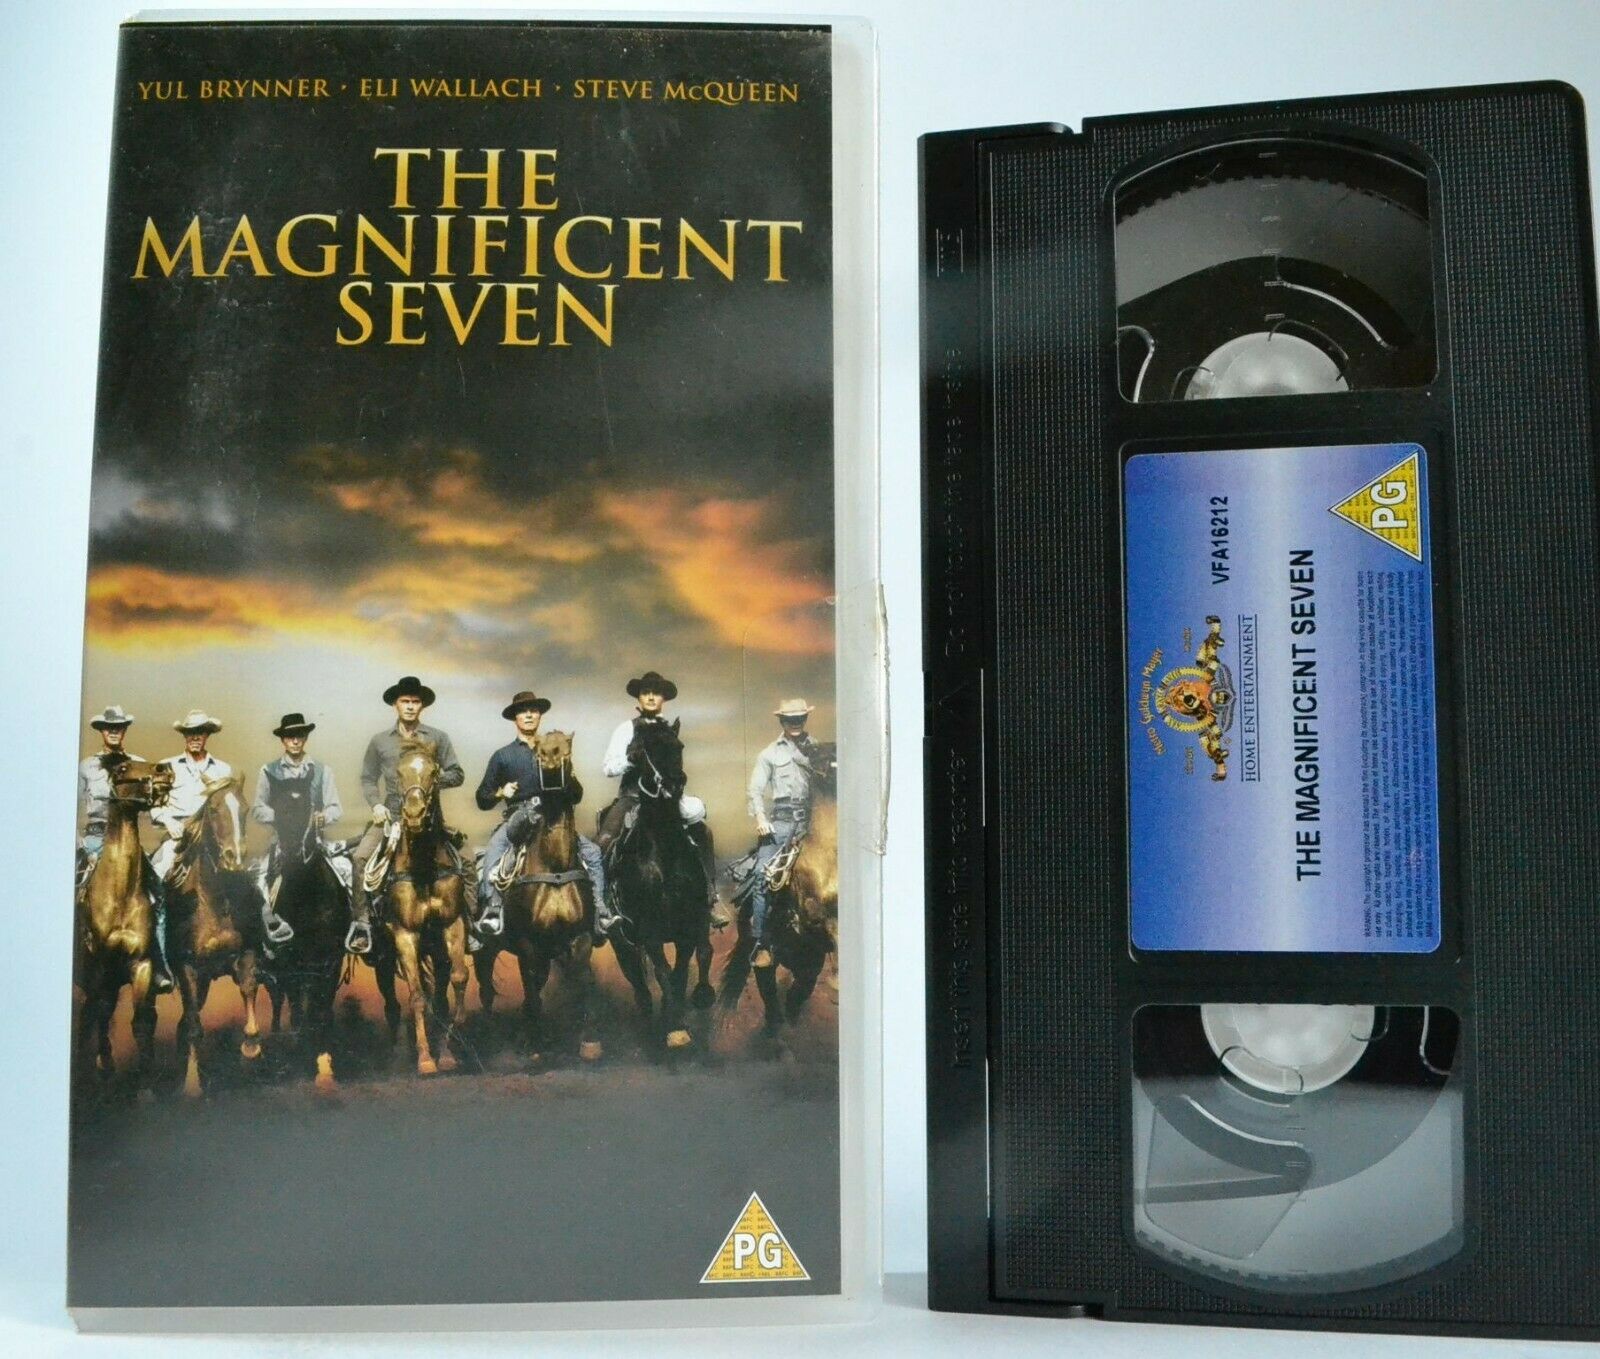 The Magnificent Seven (1960) - Western - Yul Brynner / Steve McQueen - Pal VHS-